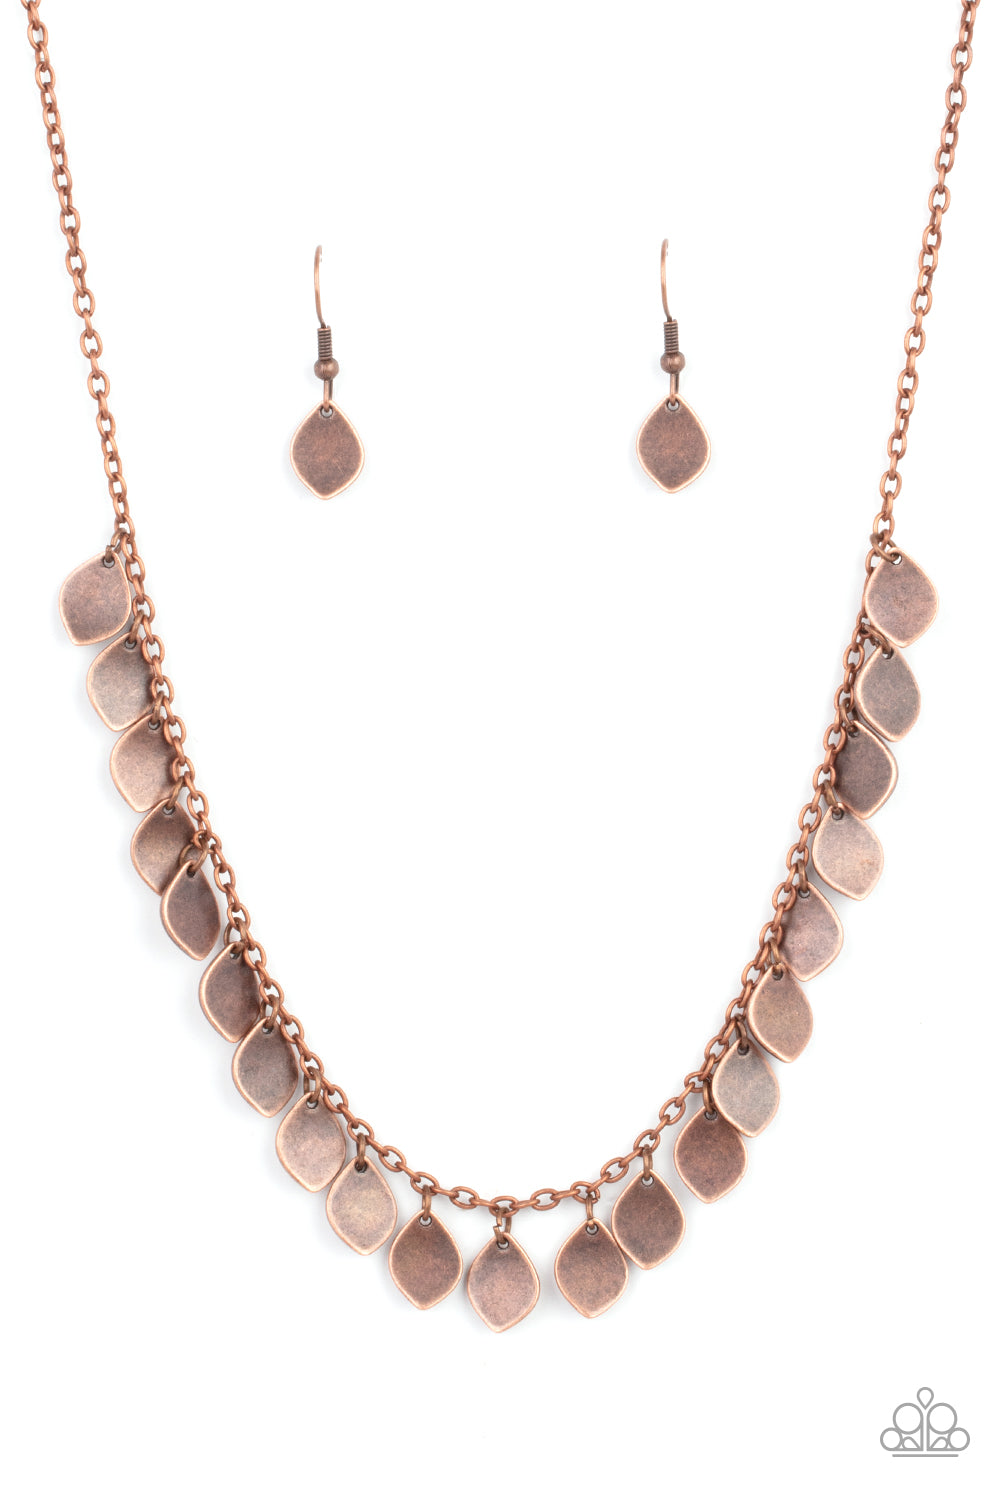 Dainty DISCovery Copper Necklace - Paparazzi Accessories  Teardrop copper discs drip from a dainty copper chain, creating a rustic fringe below the collar. Features an adjustable clasp closure.  All Paparazzi Accessories are lead free and nickel free!  Sold as one individual necklace. Includes one pair of matching earrings.